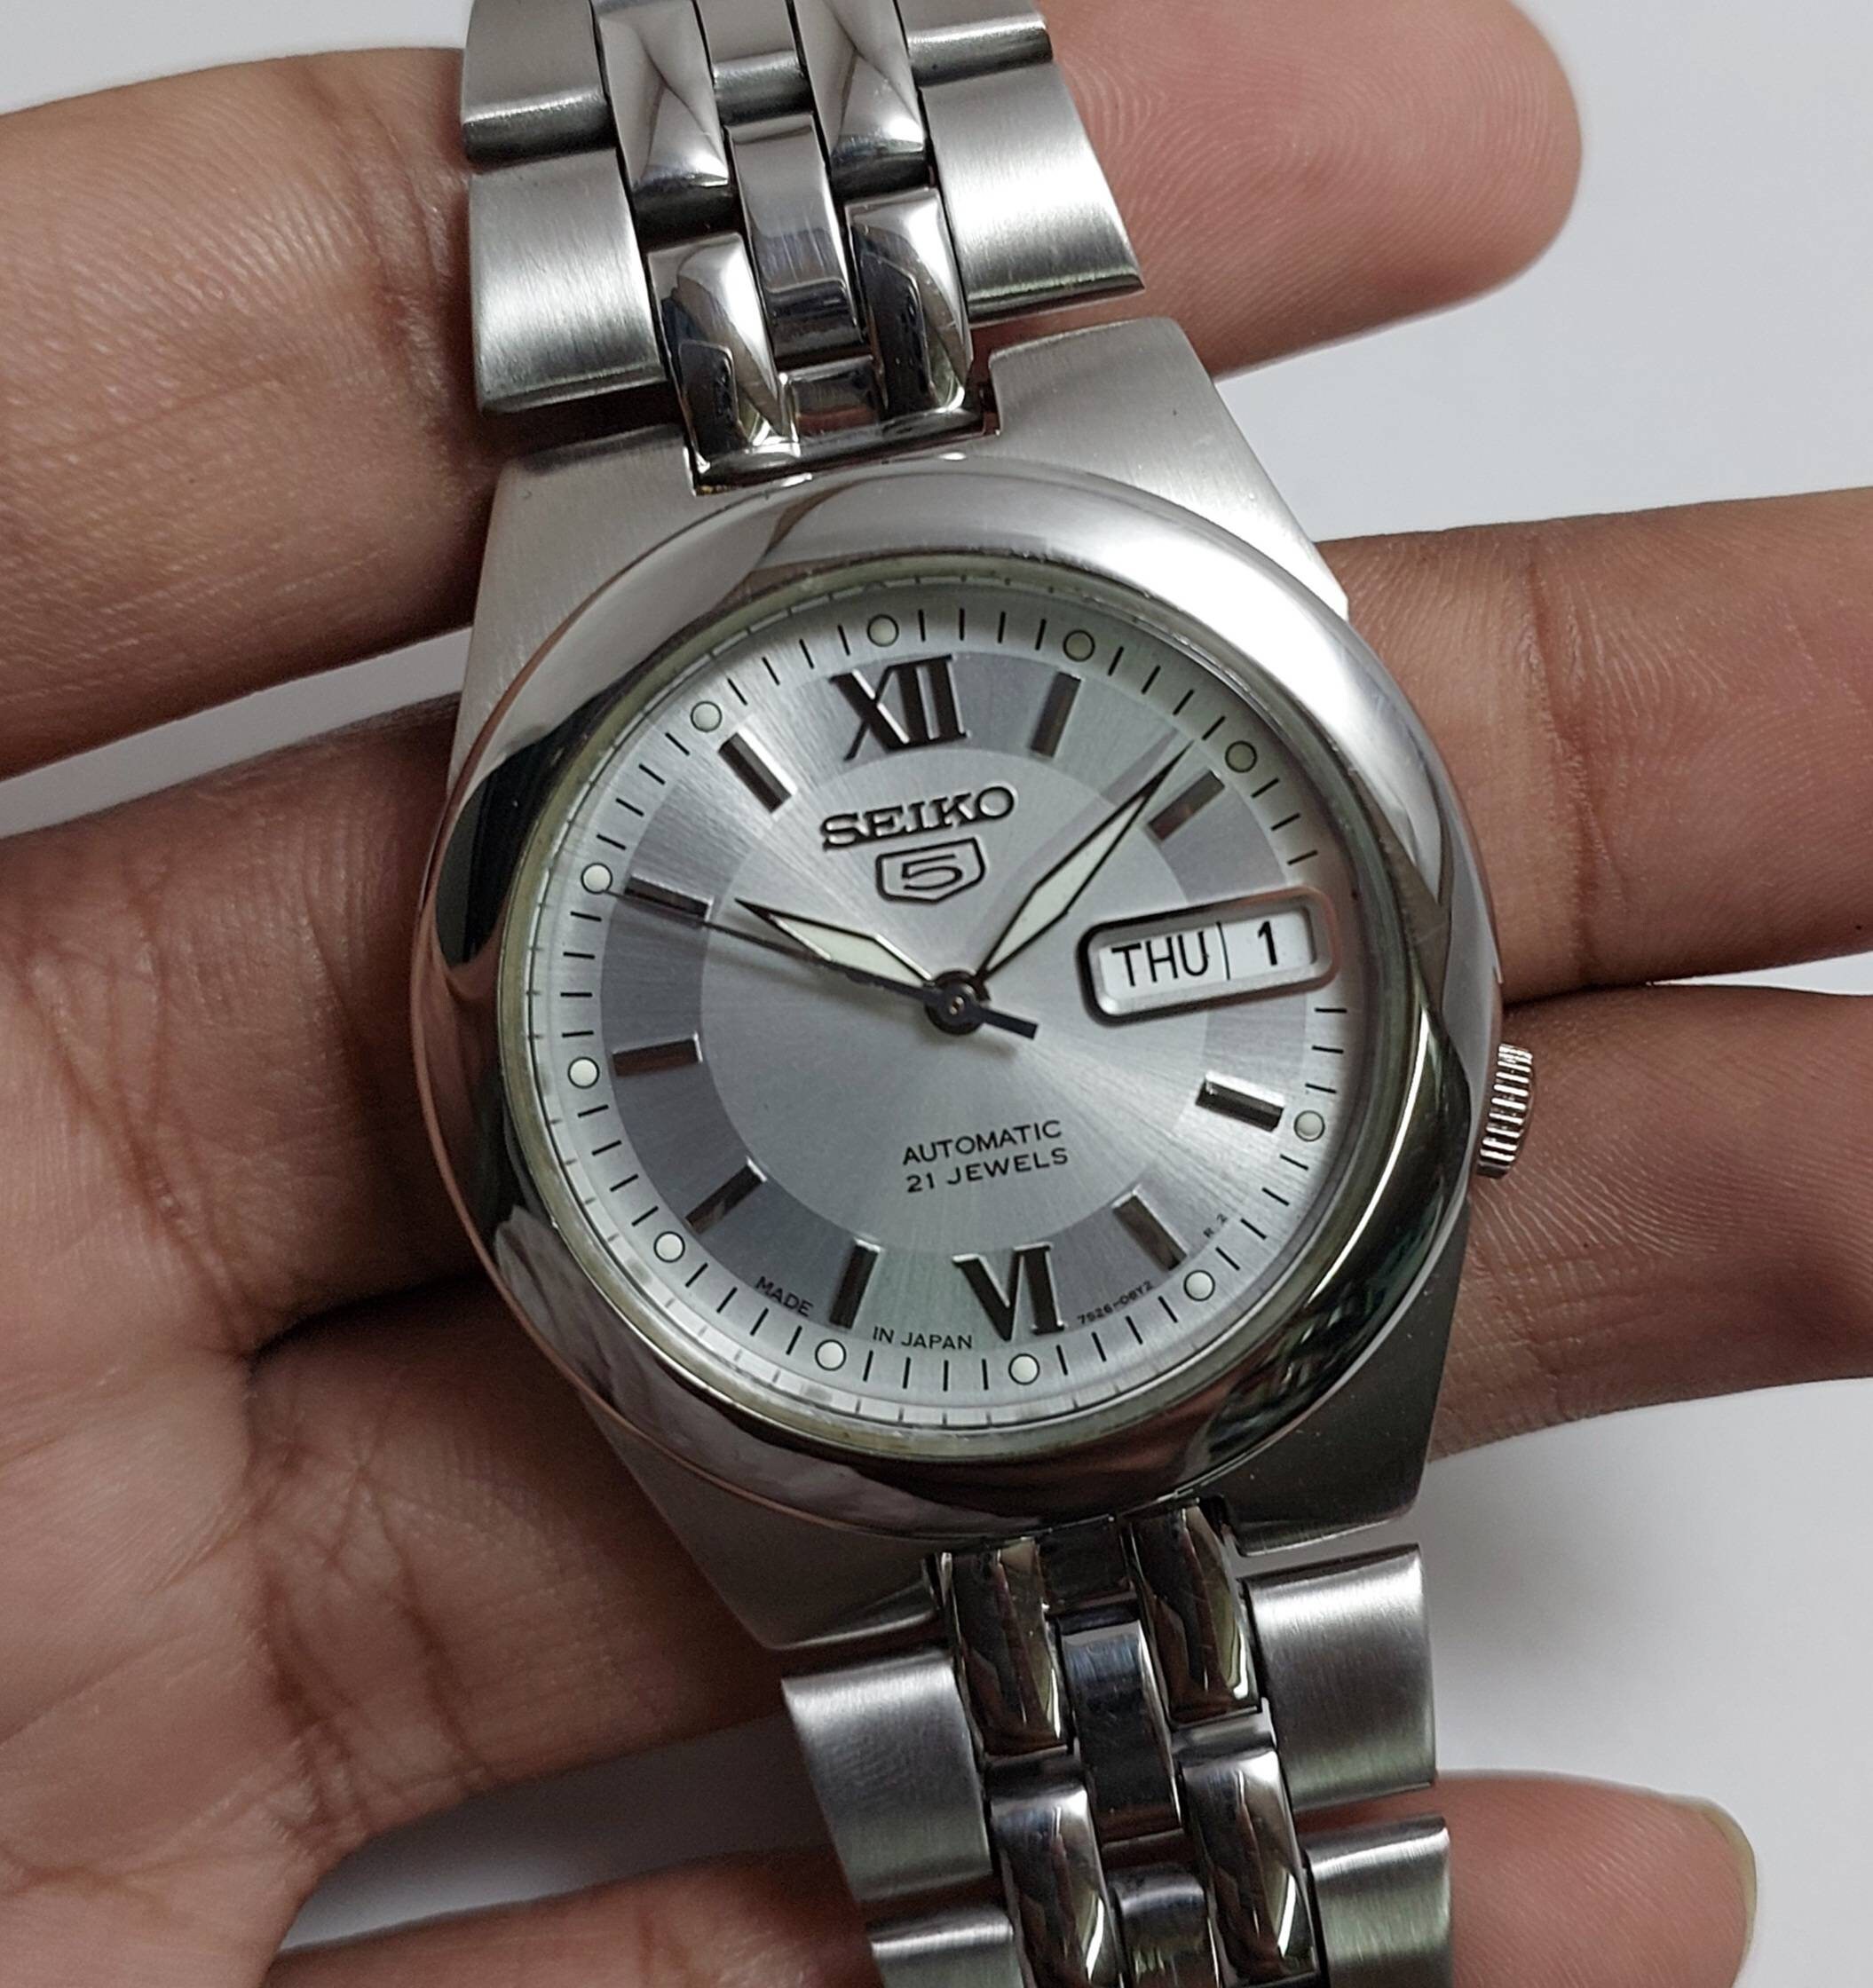 Extremely Rare Seiko 5 Automatic Watch Beautiful Silver Dial - Etsy